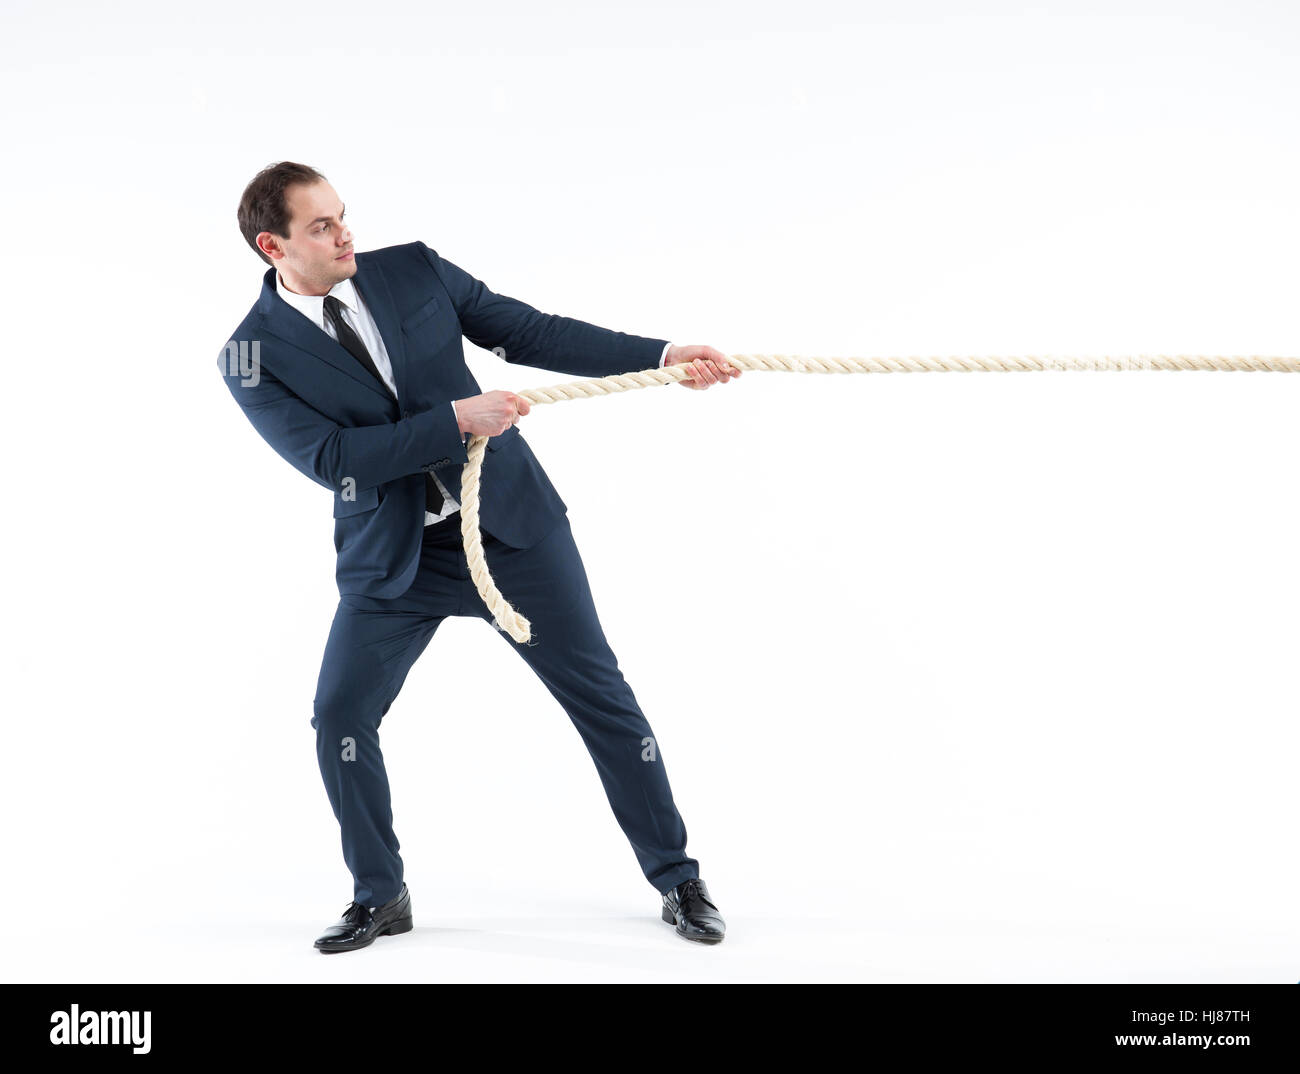 Strong and confident business leader. Side view of businessman in suit pulling a rope while standing against white background Stock Photo